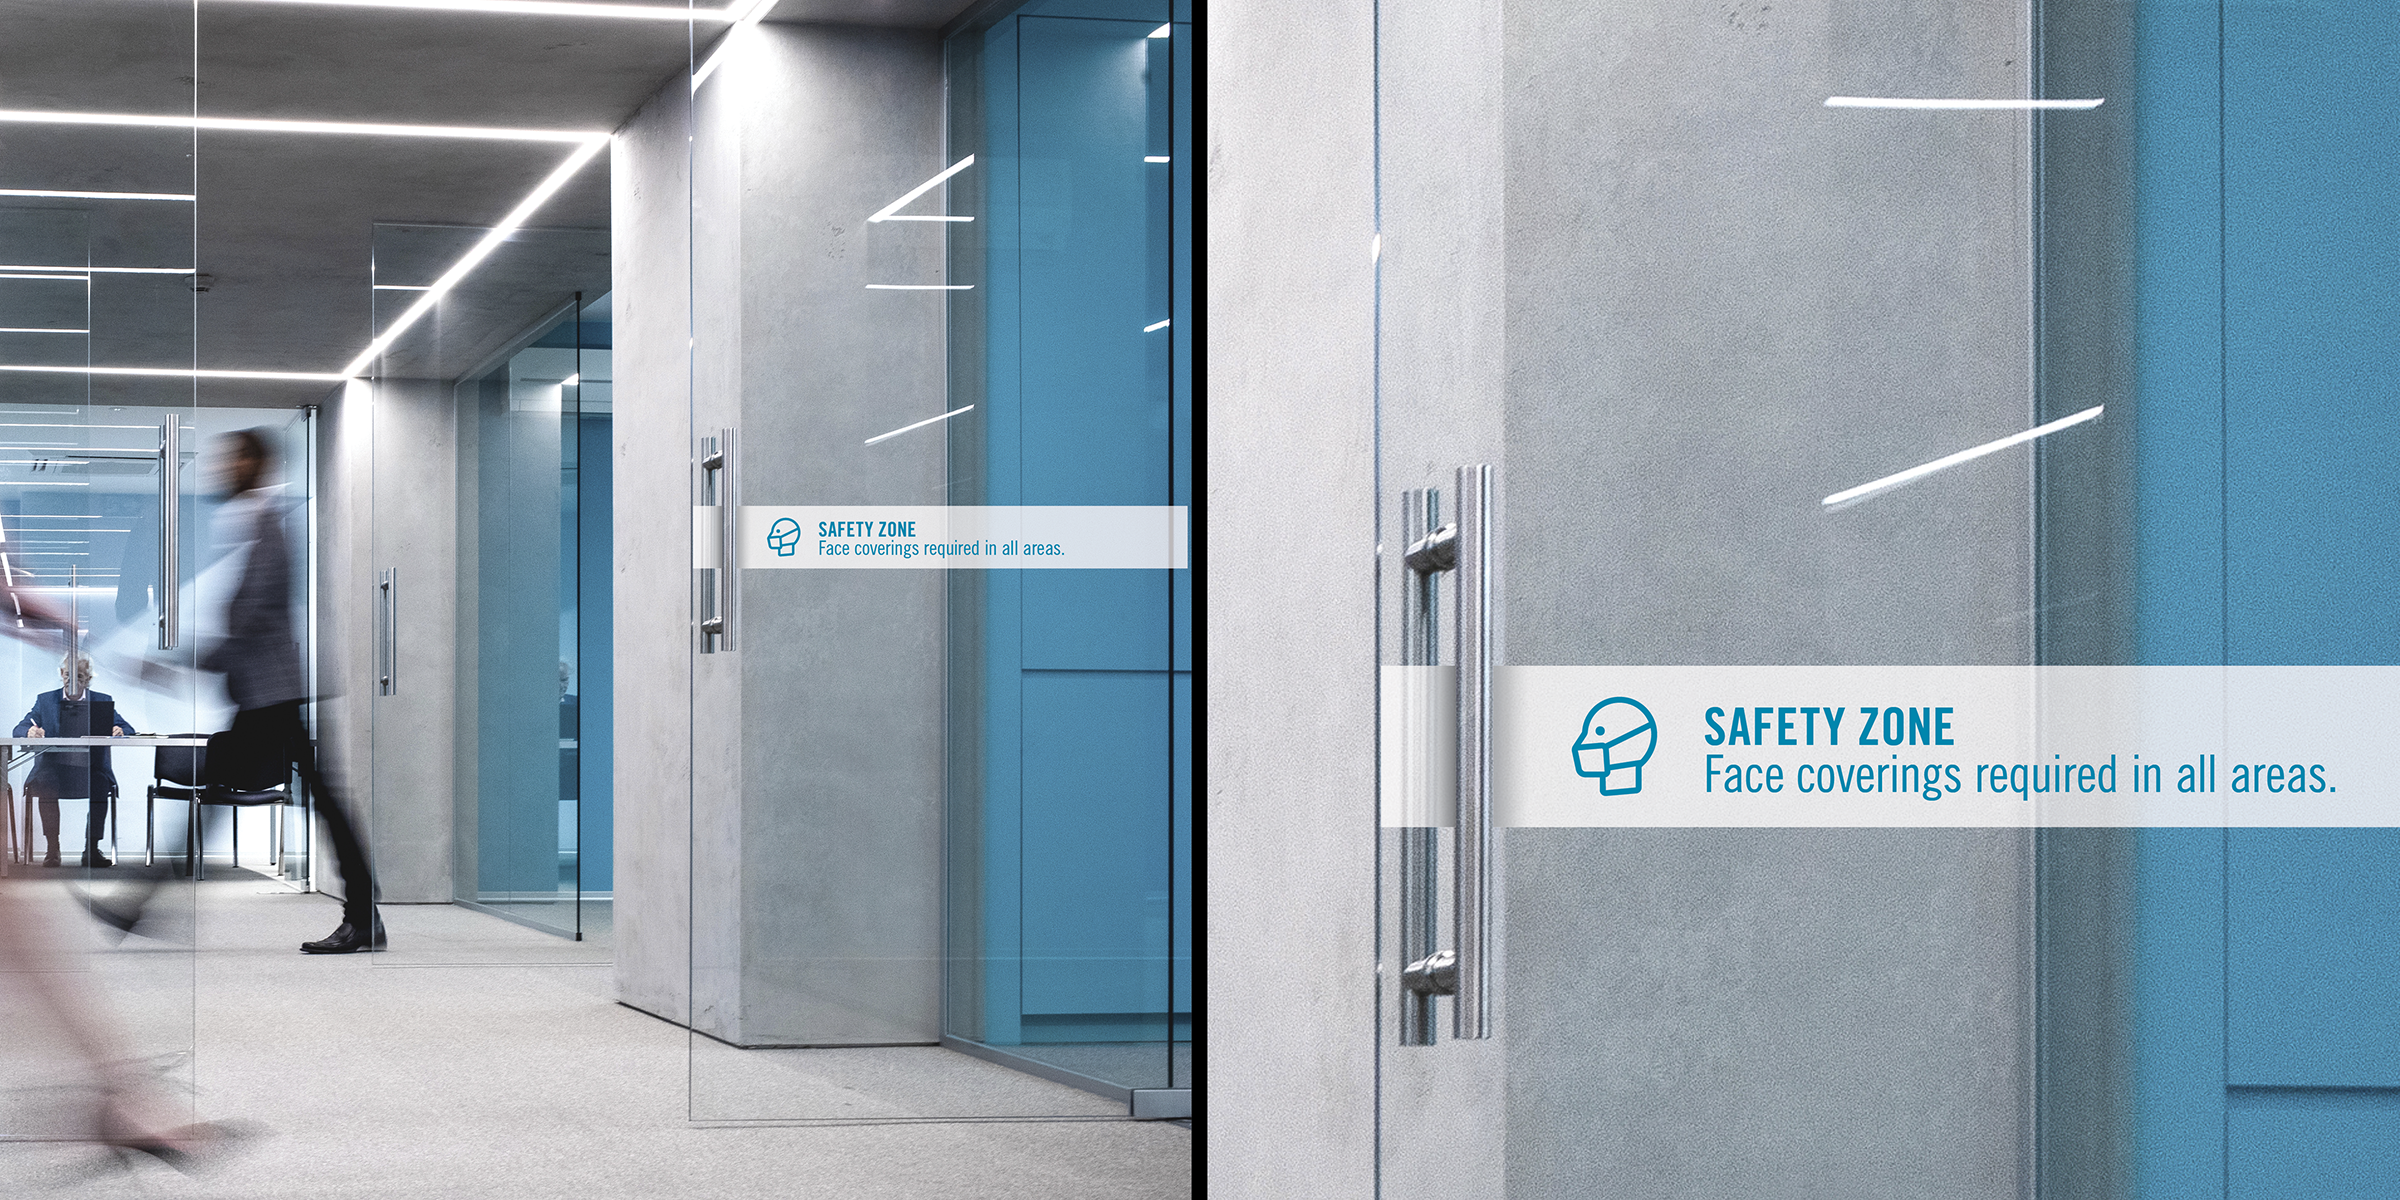 WORKPLACES. Within individual office spaces, companies can apply graphics to doors and walls to remind employees of new protocols, and to help teams demonstrate their respect and care for each other’s well-being.